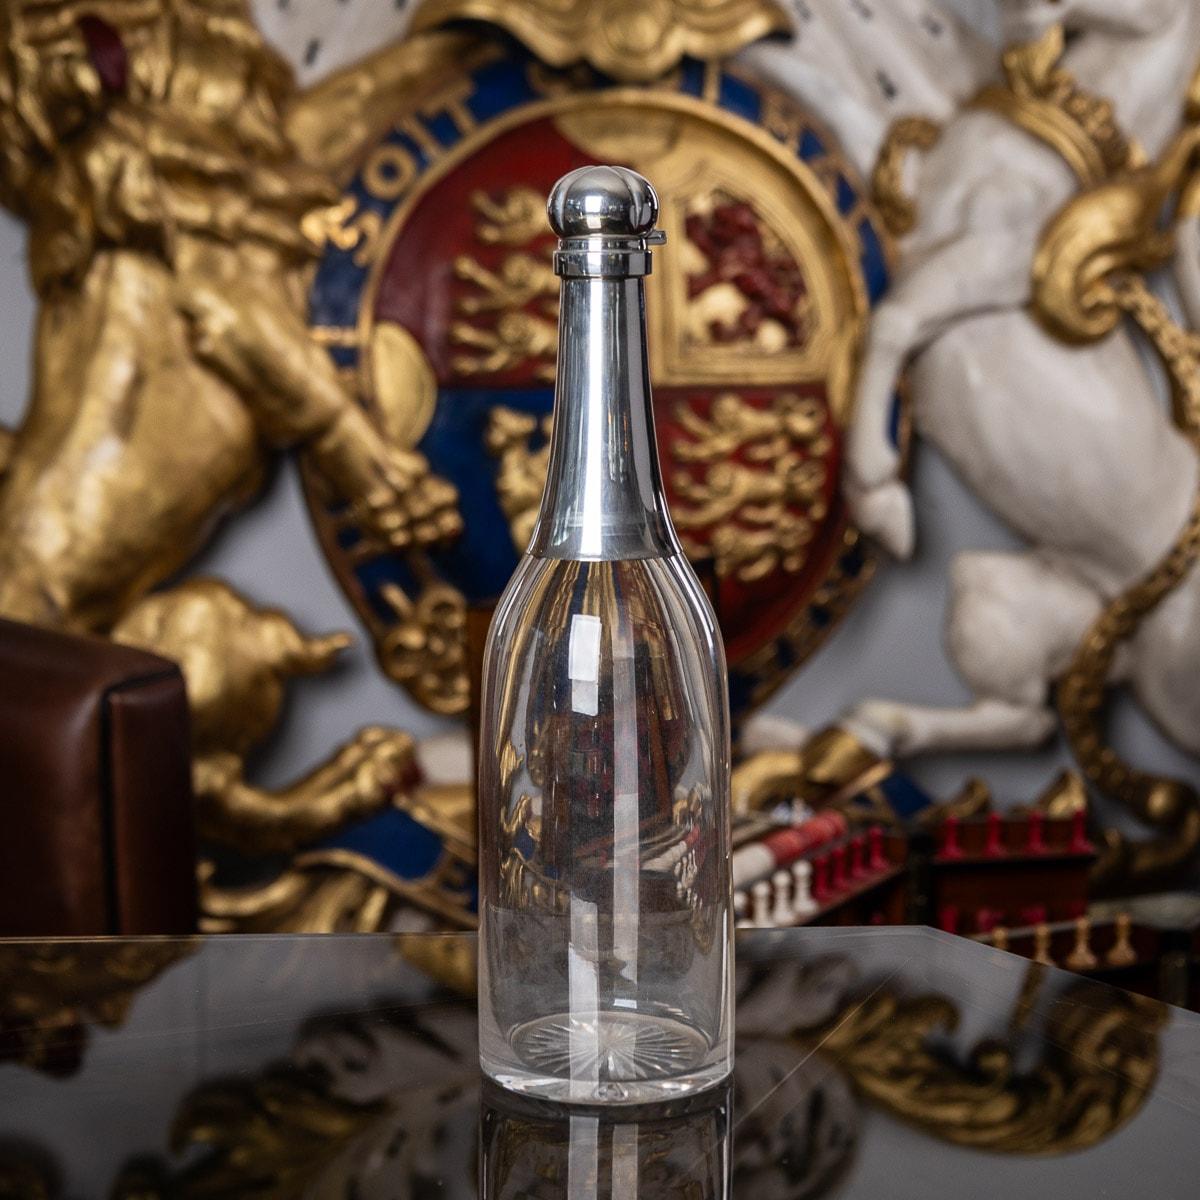 Antique late-19th Century Victorian novelty solid silver & glass champagne bottle shaped decanter, with hinged lids and glass stopper. Hallmarked English silver (925 standard), London year 1895 (U), Maker J.G&S (John Grinsell & Sons). It is easy to